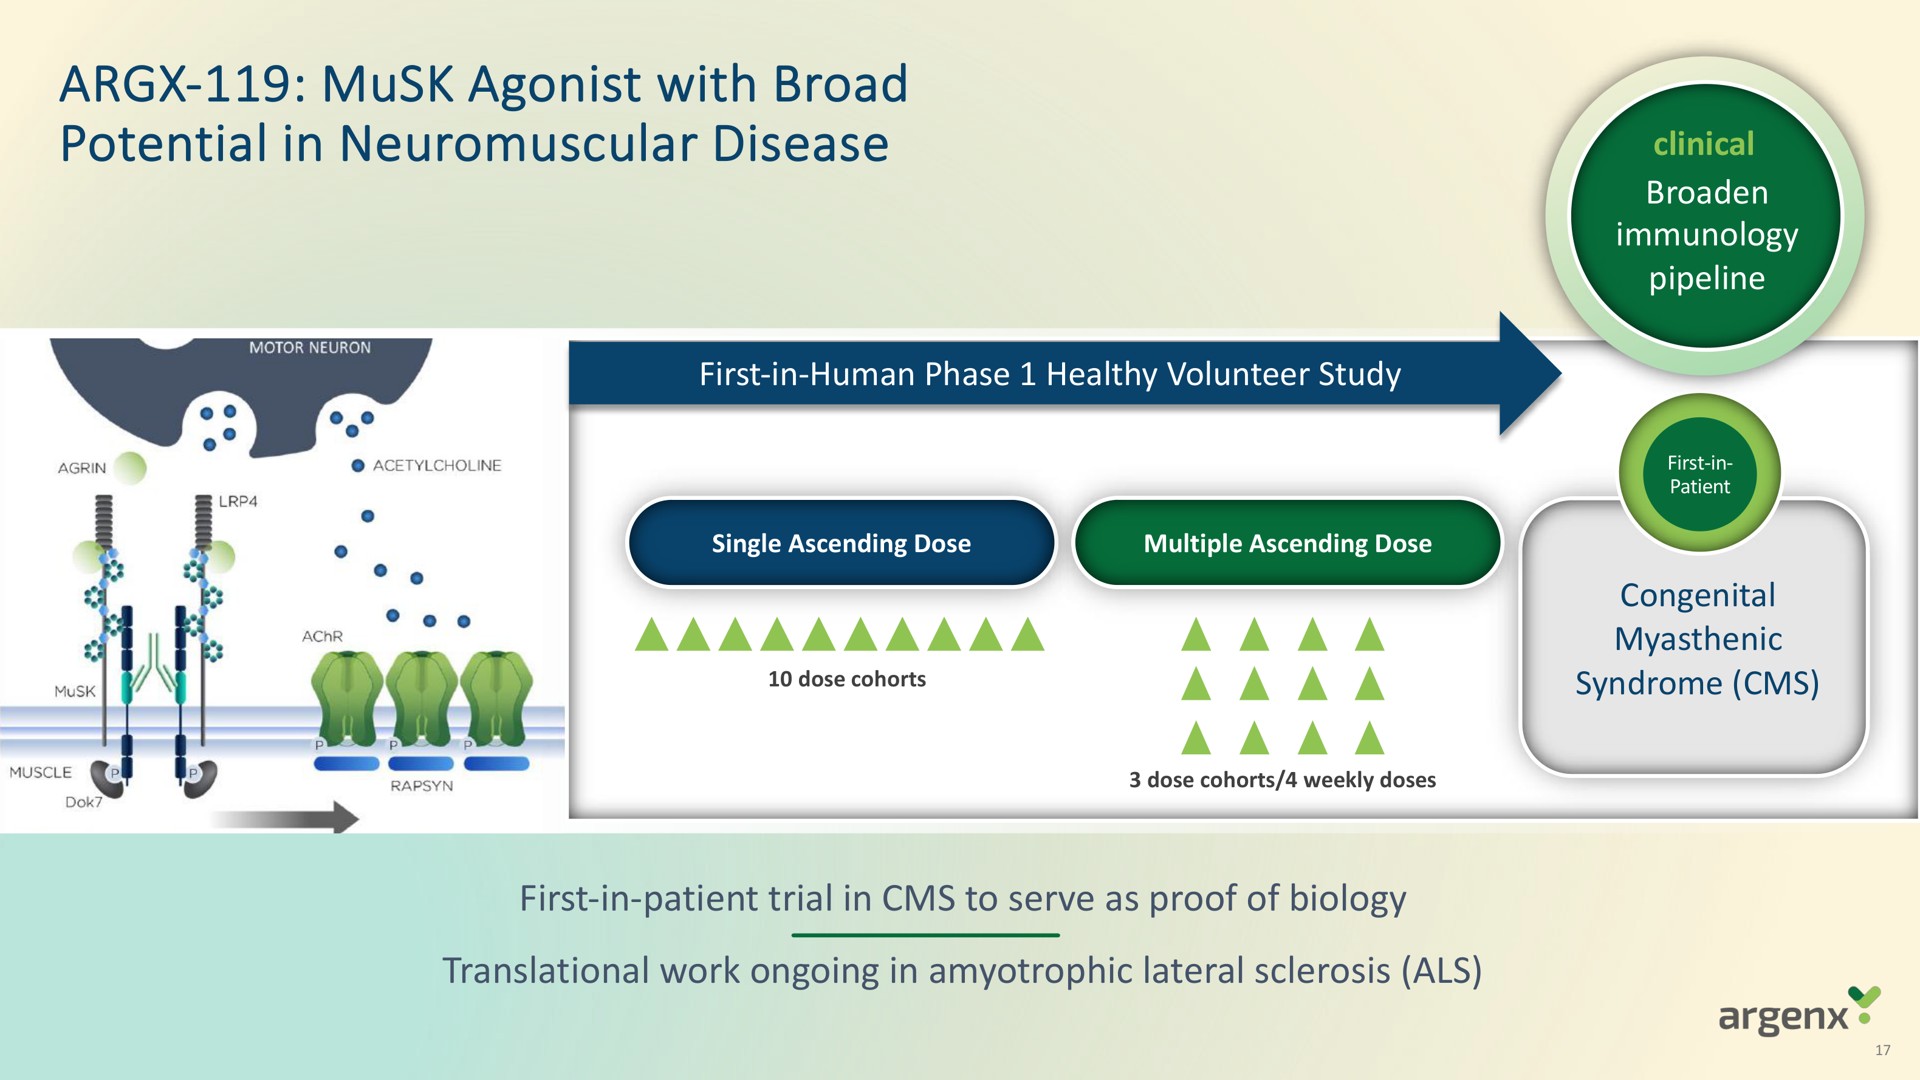 musk agonist with broad potential in neuromuscular disease clinical | argenx SE